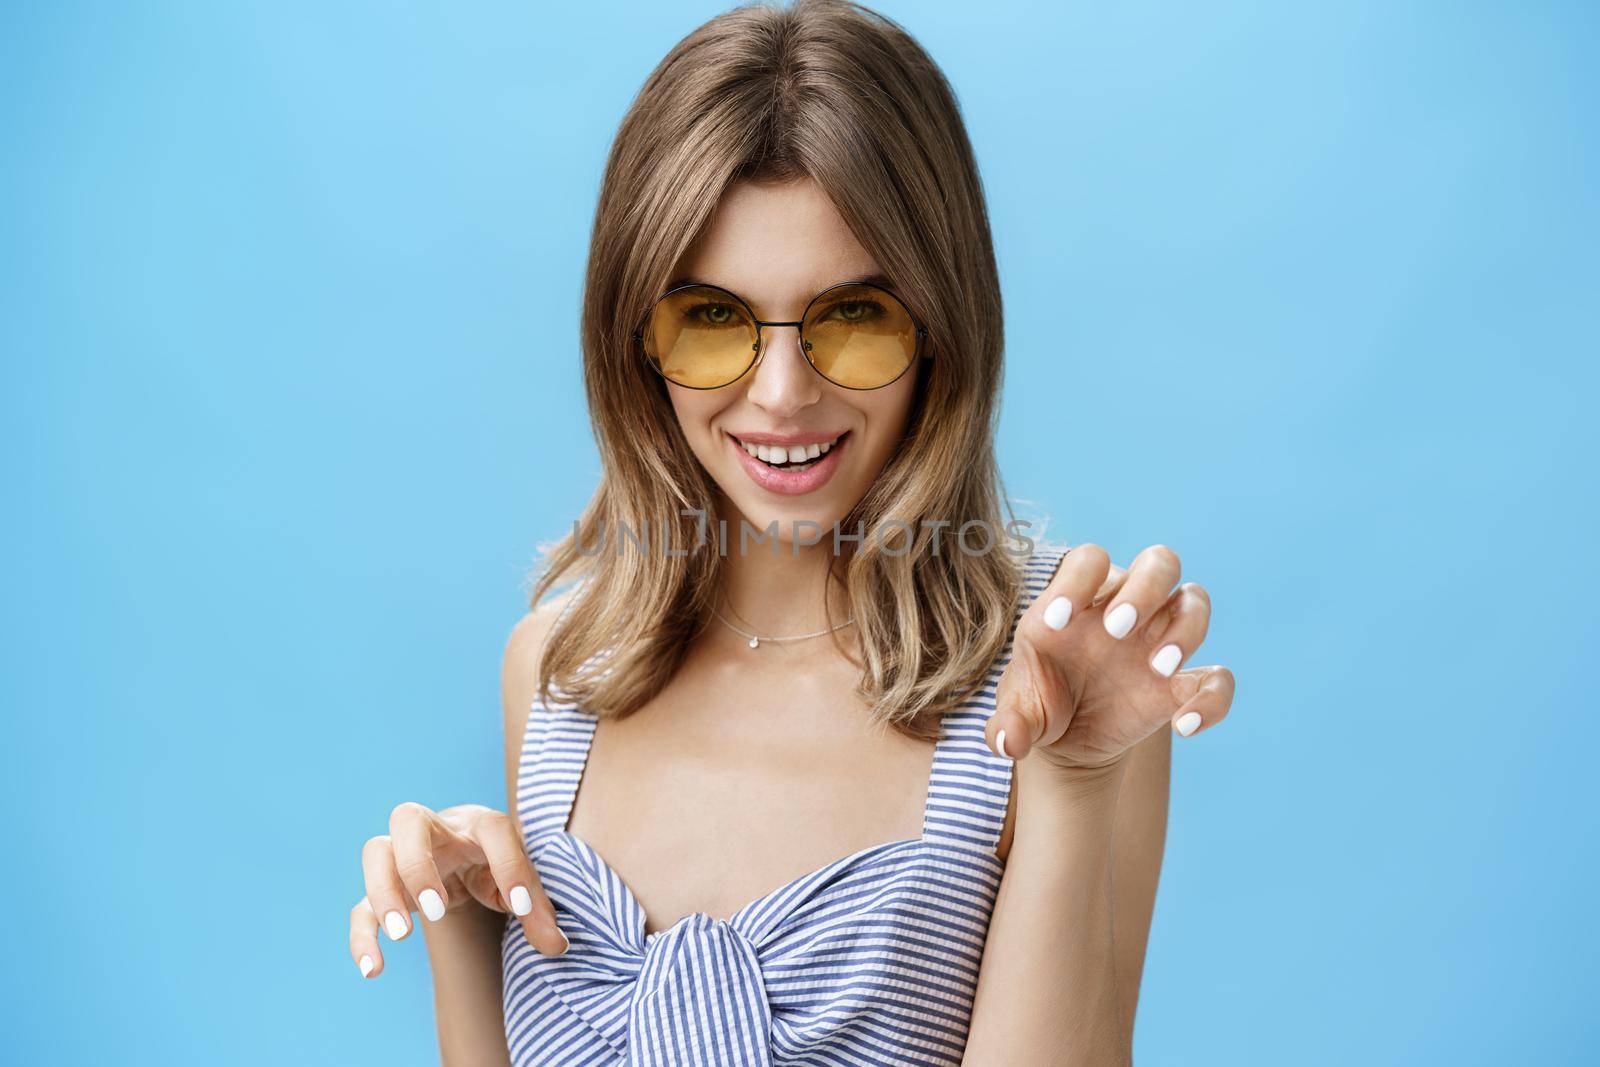 Sensual woman feeling like attractive wild cat raising hands like paws saying meow looking daring and flirty at camera, seducing with confident gaze, wearing stylish sunglasses and striped top. Body language concept